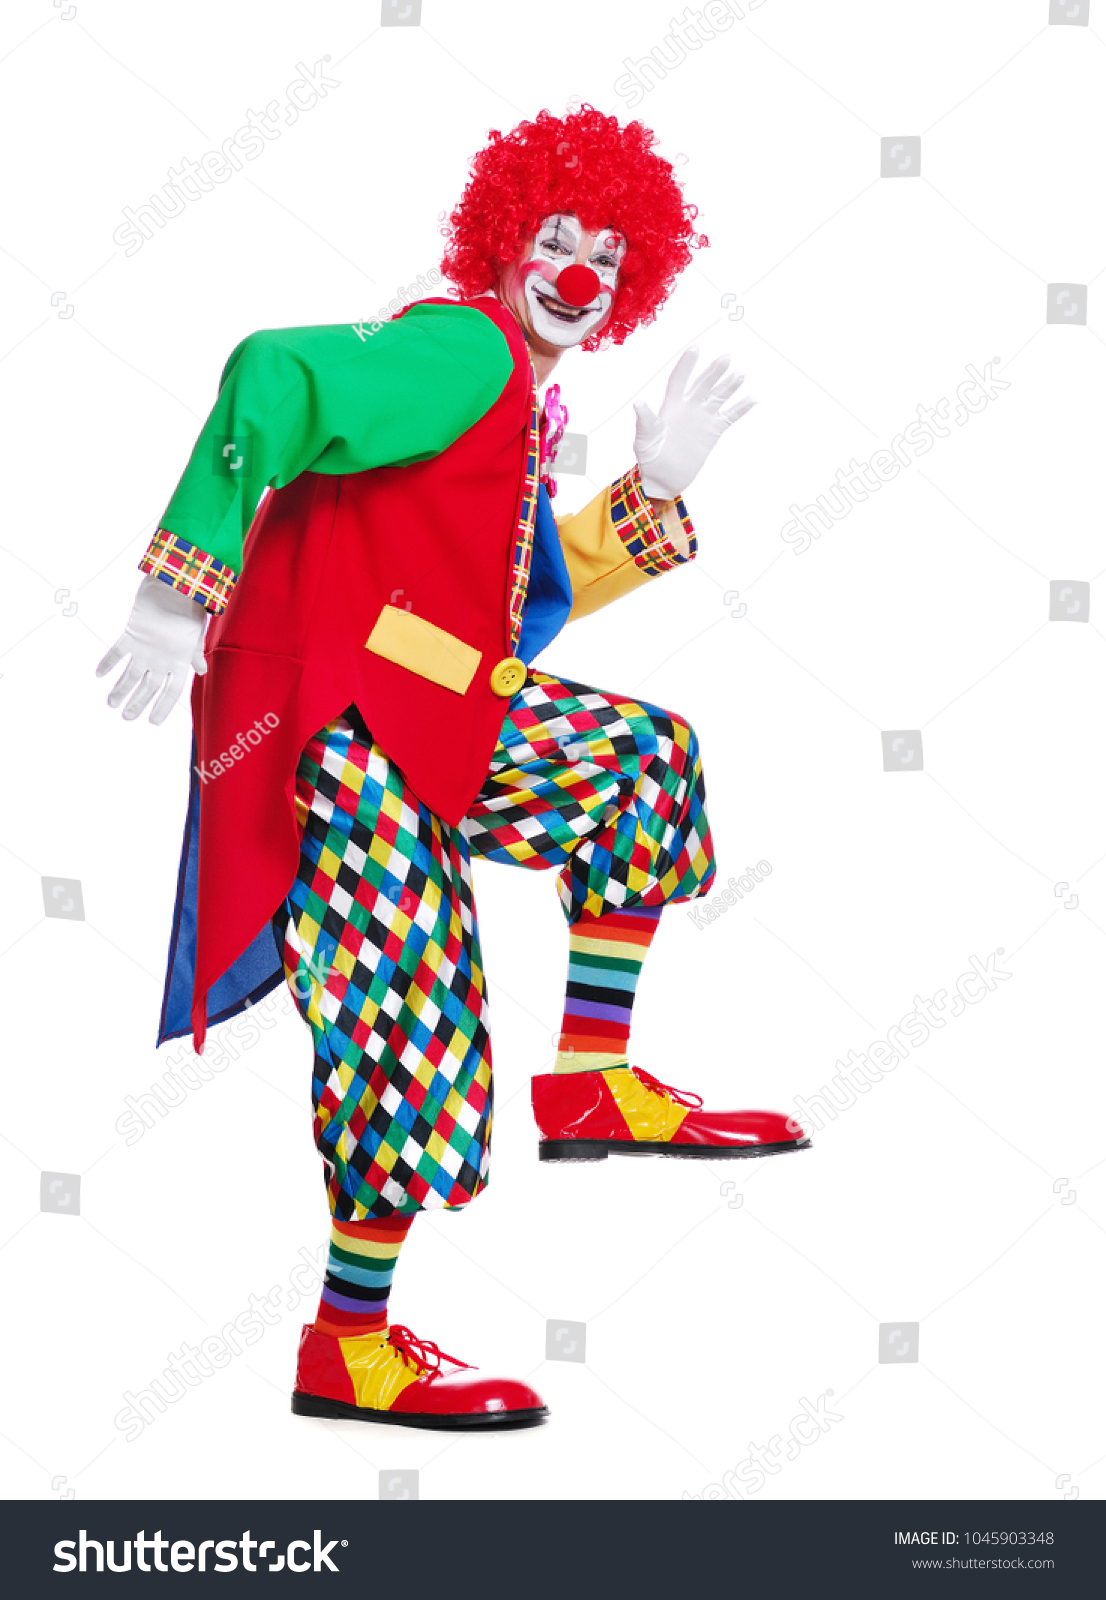 Side view full length picture of a clown imitating comic walk  #1045903348